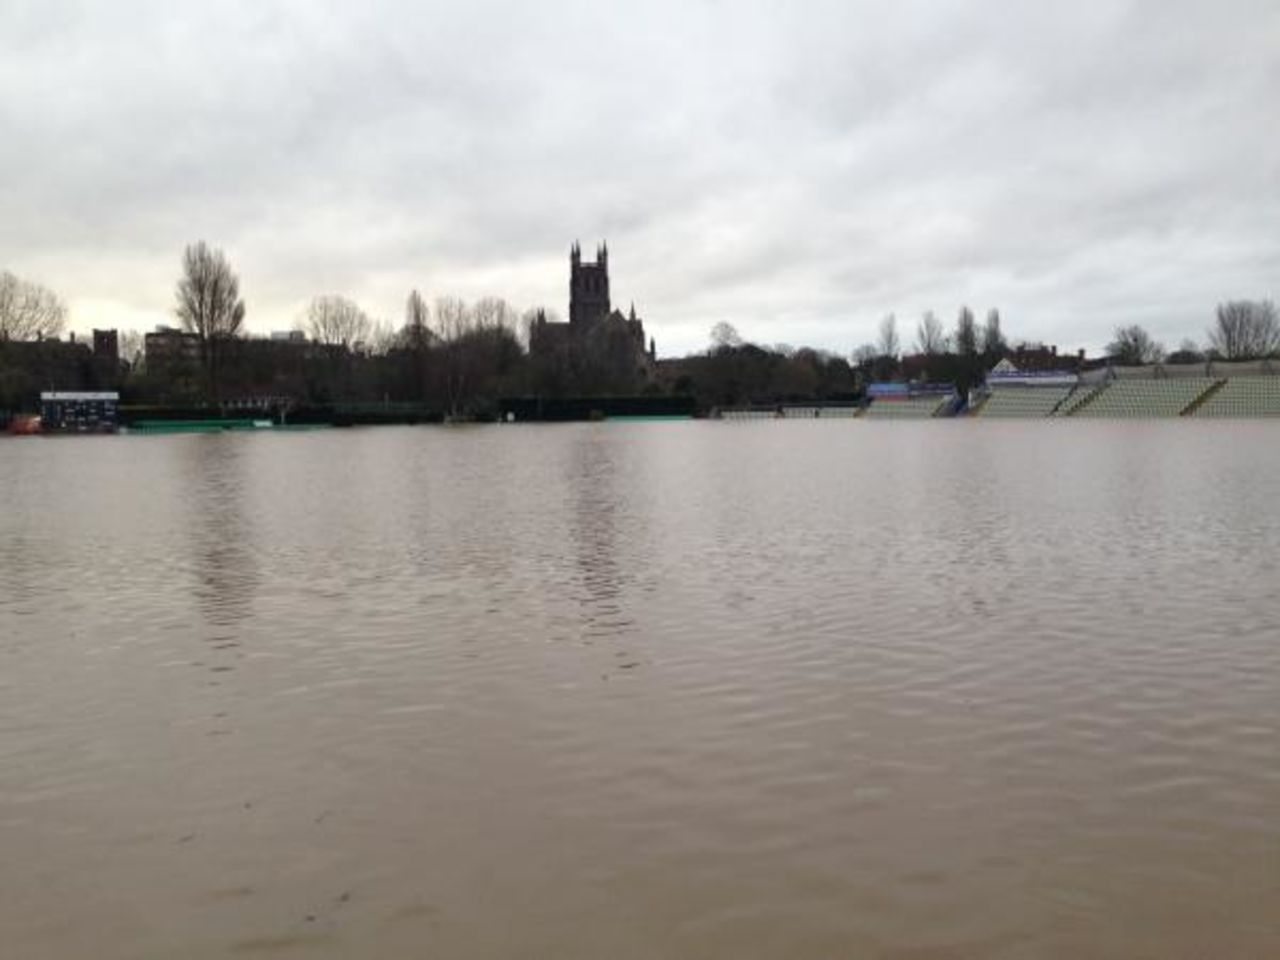 Worcestershire's New Road ground is under water again as much of the UK suffers floods after heavy rain, New Road, November 27, 2012